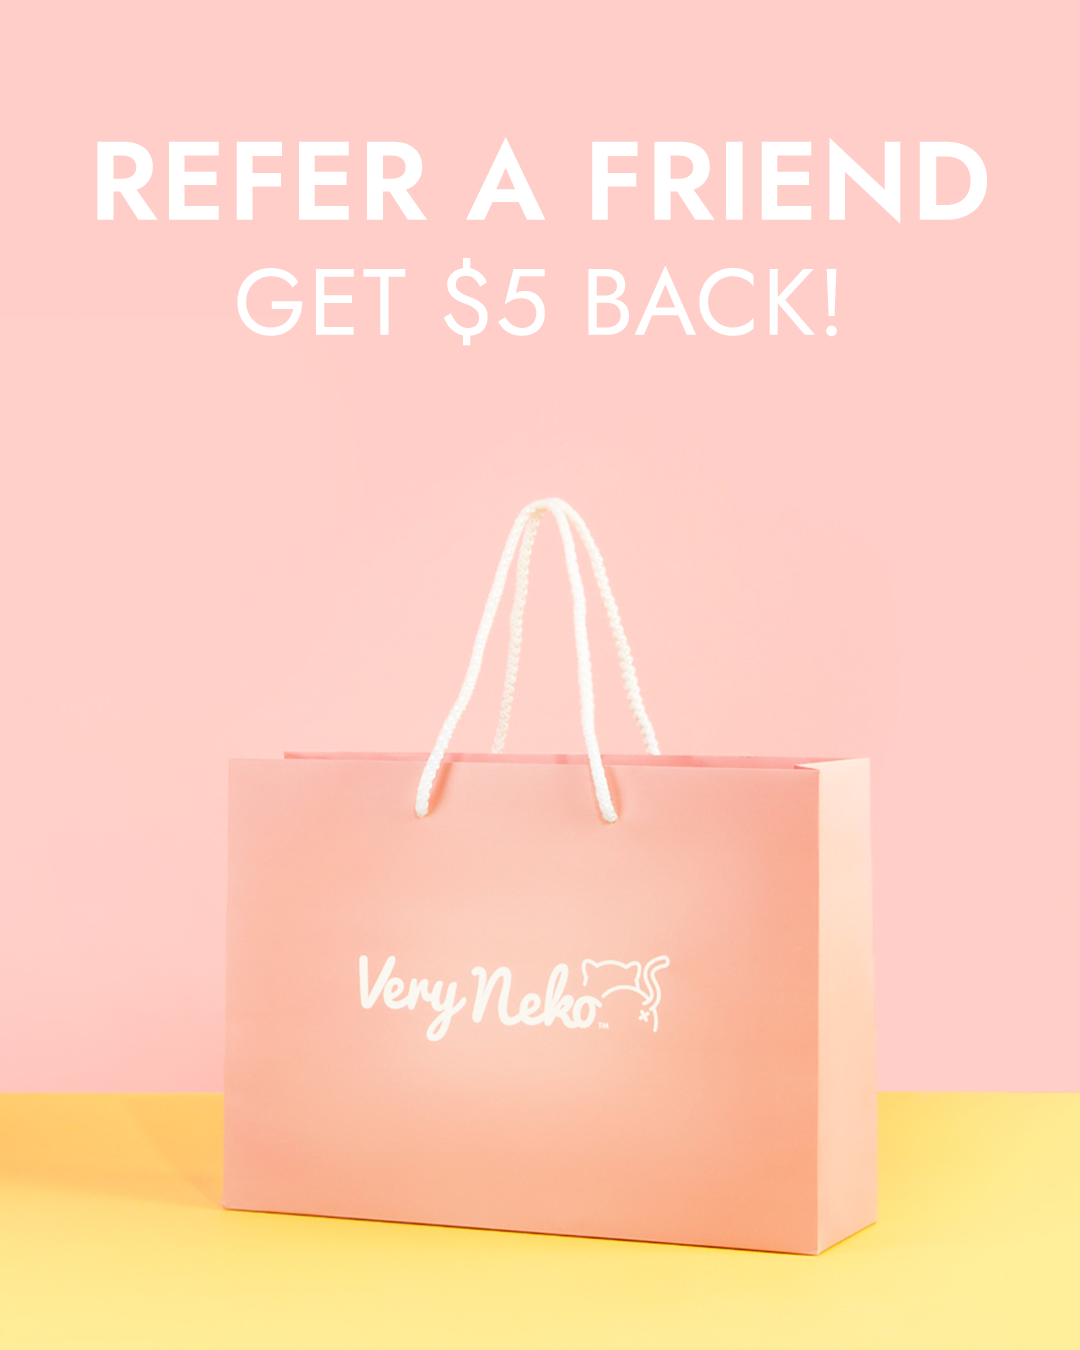 Refer a Friend and get $5 back